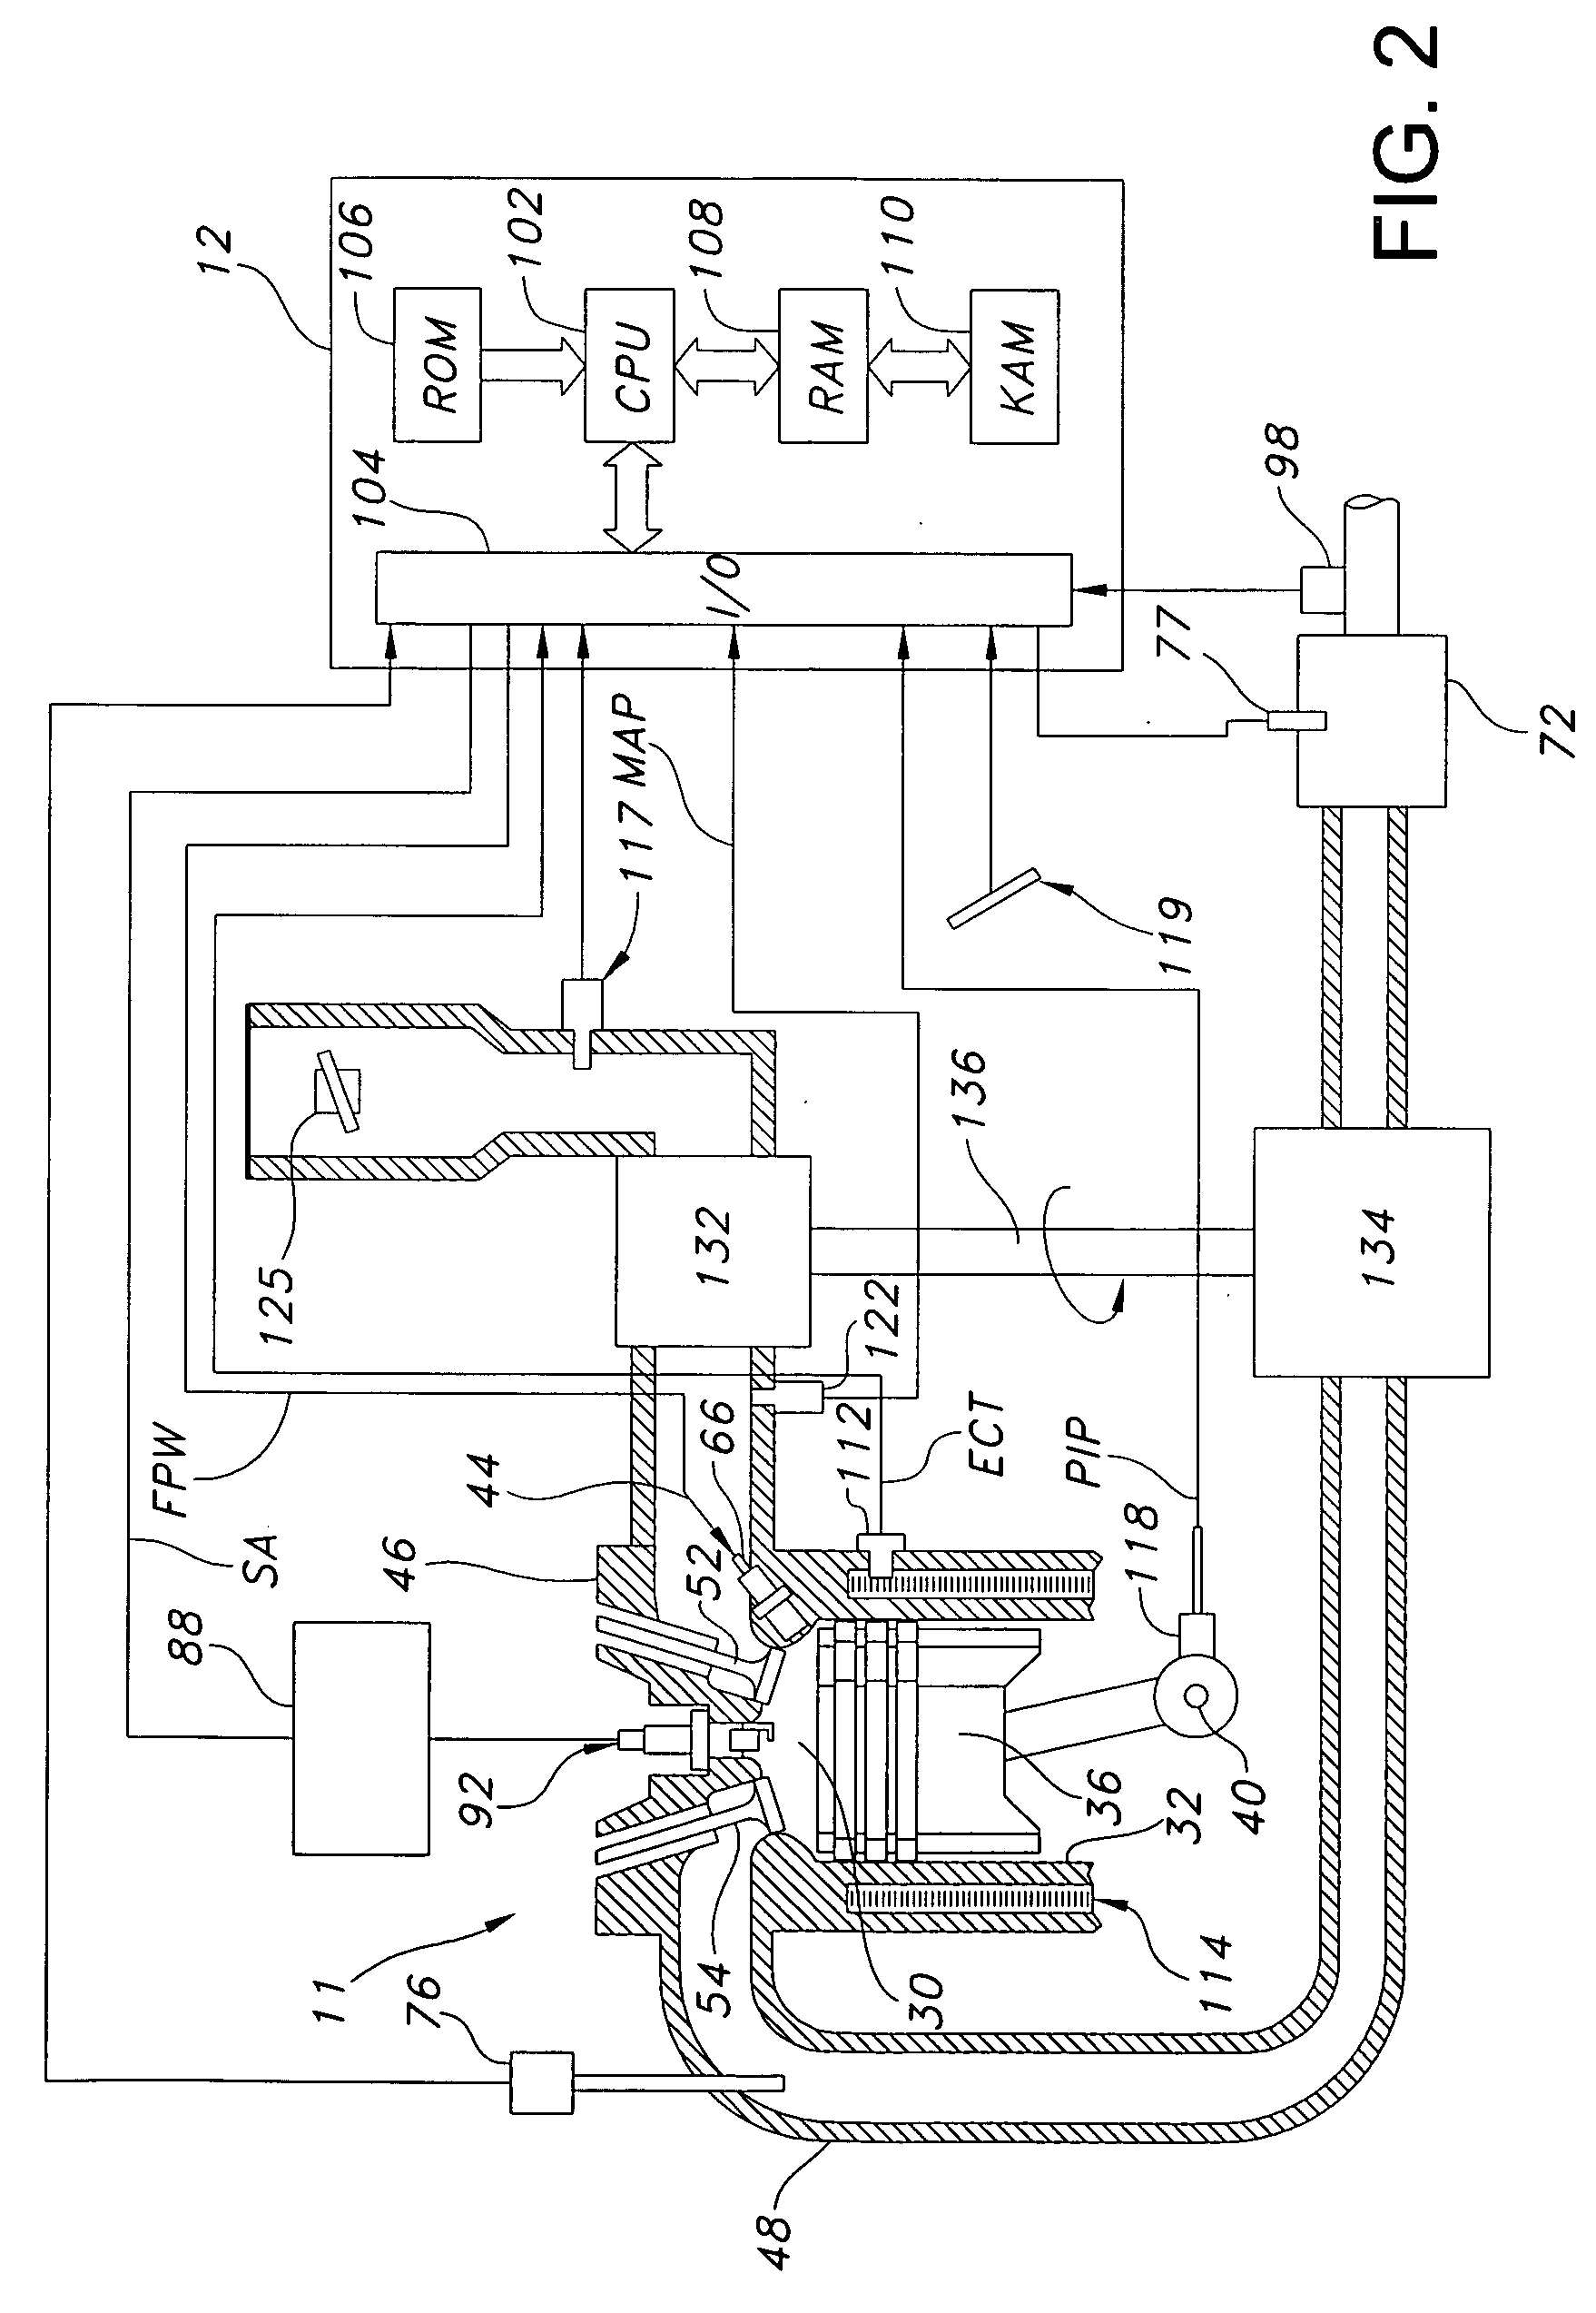 Turbo-lag compensation system having an ejector